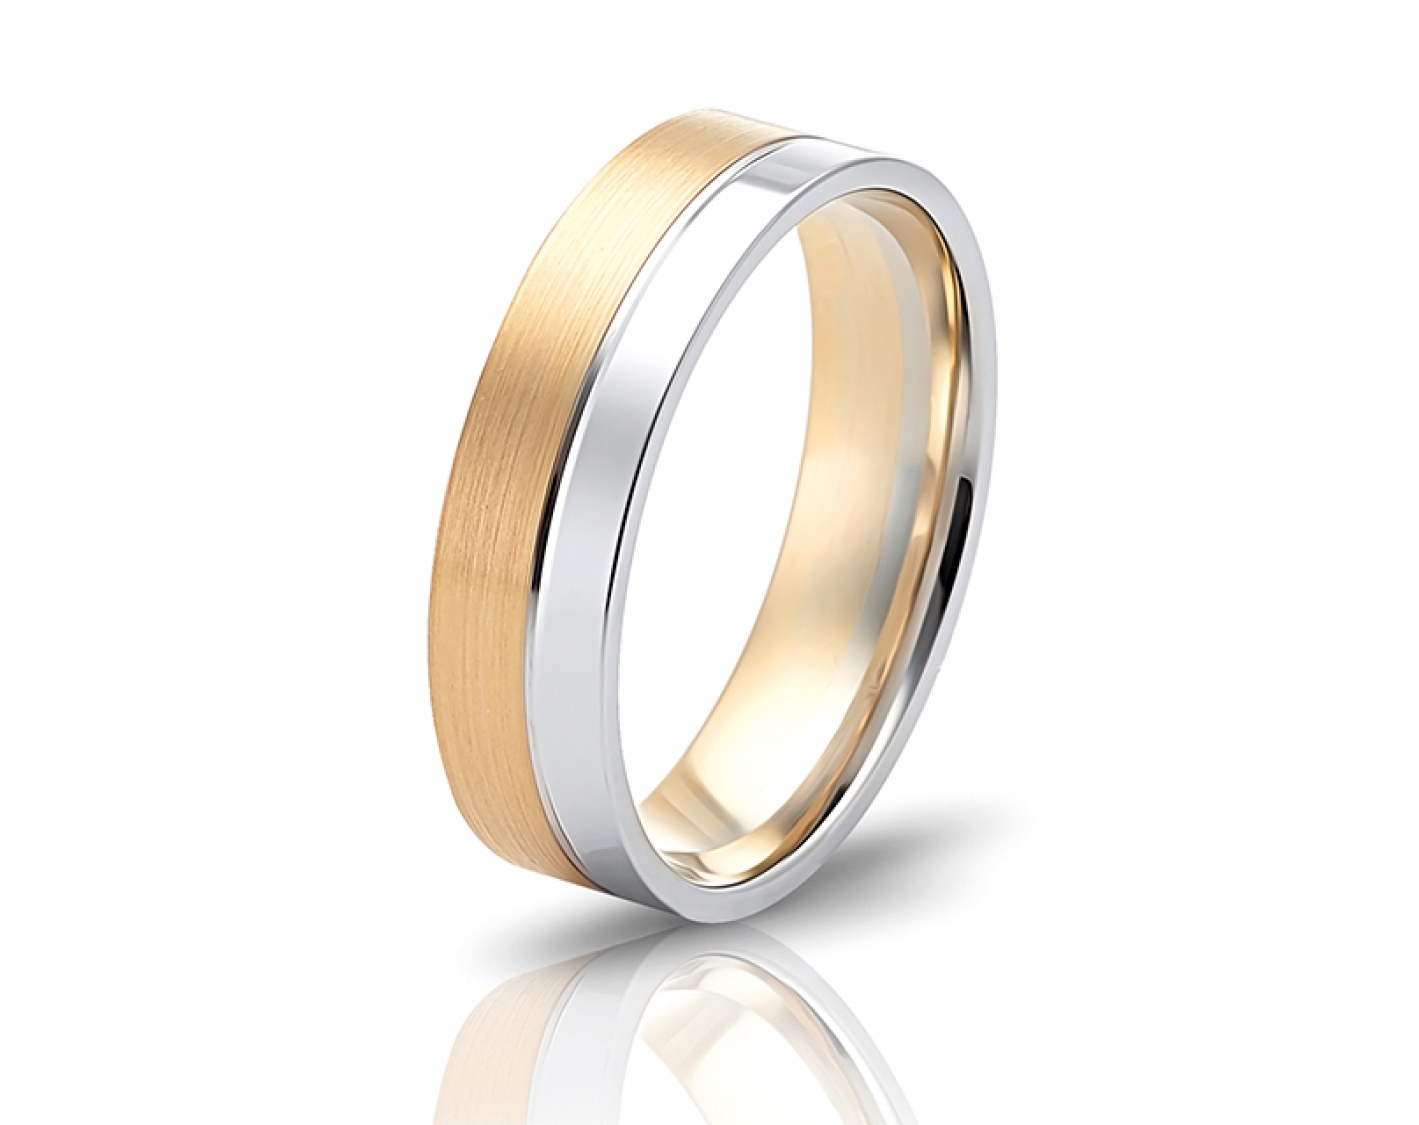 dual-tone 6mm two-toned* wedding band in matte & shiny finish